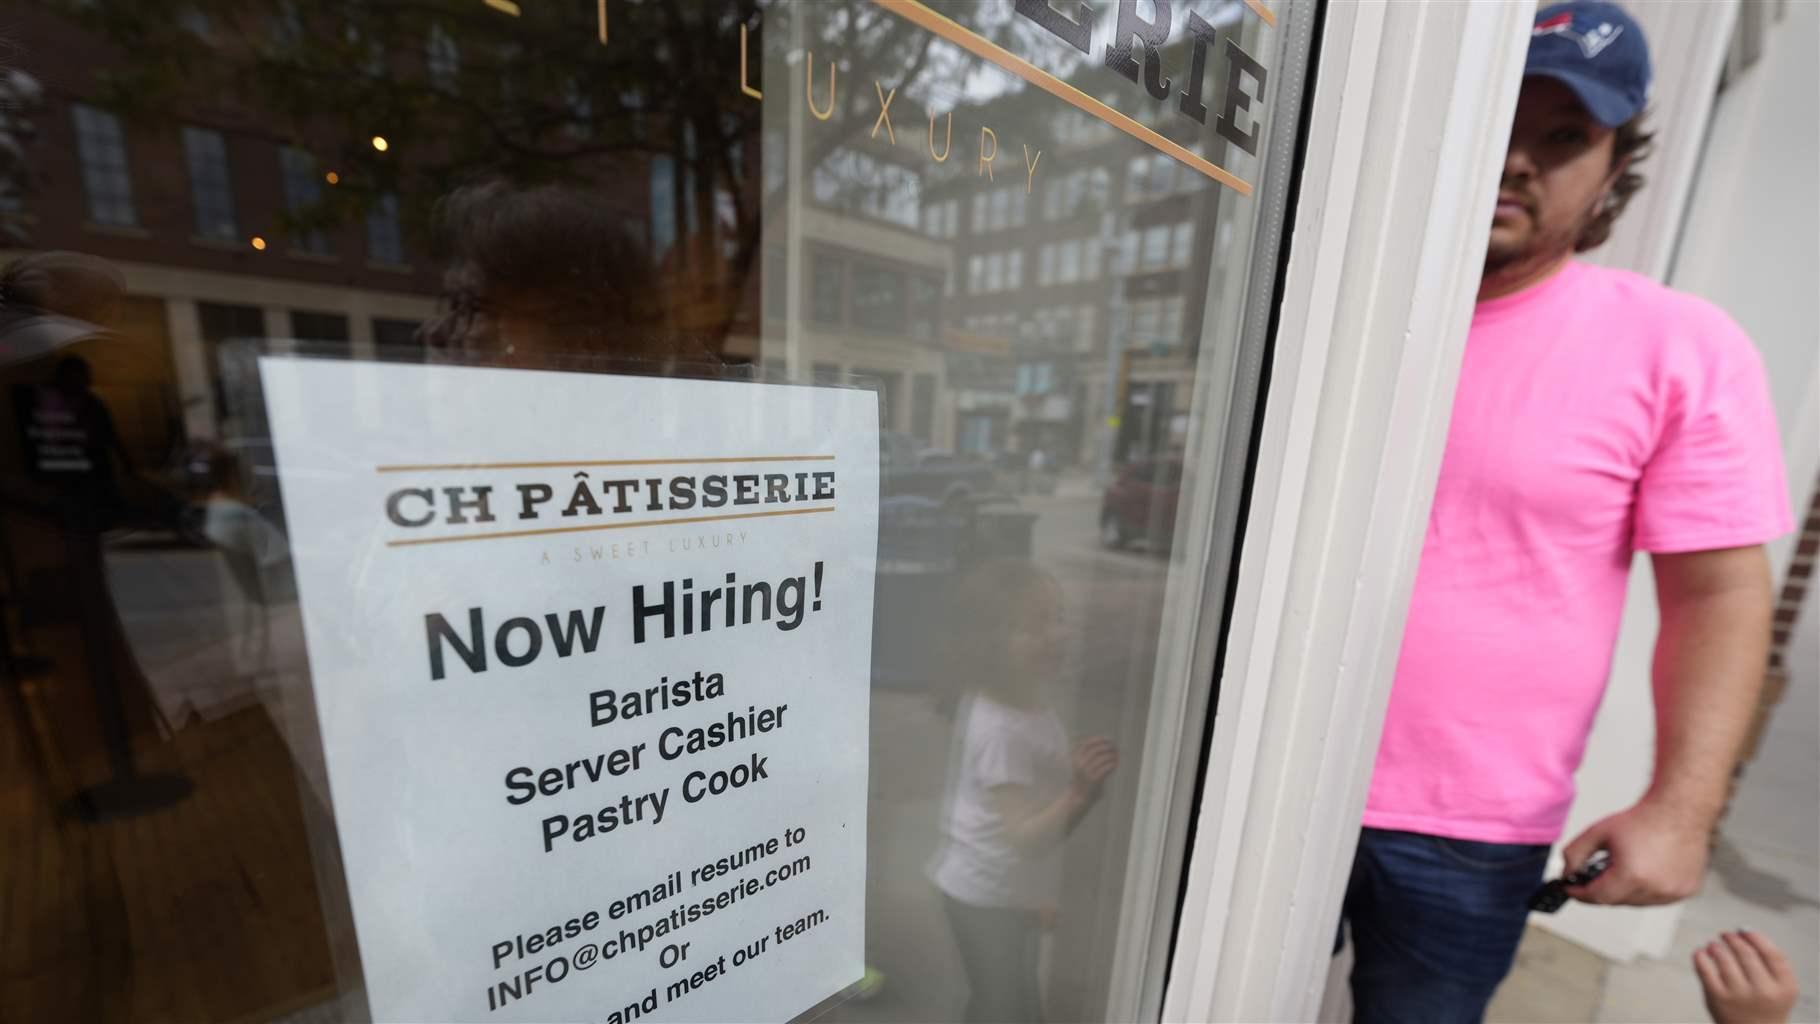 A hiring sign in Sioux Falls, S.D., beckons potential workers